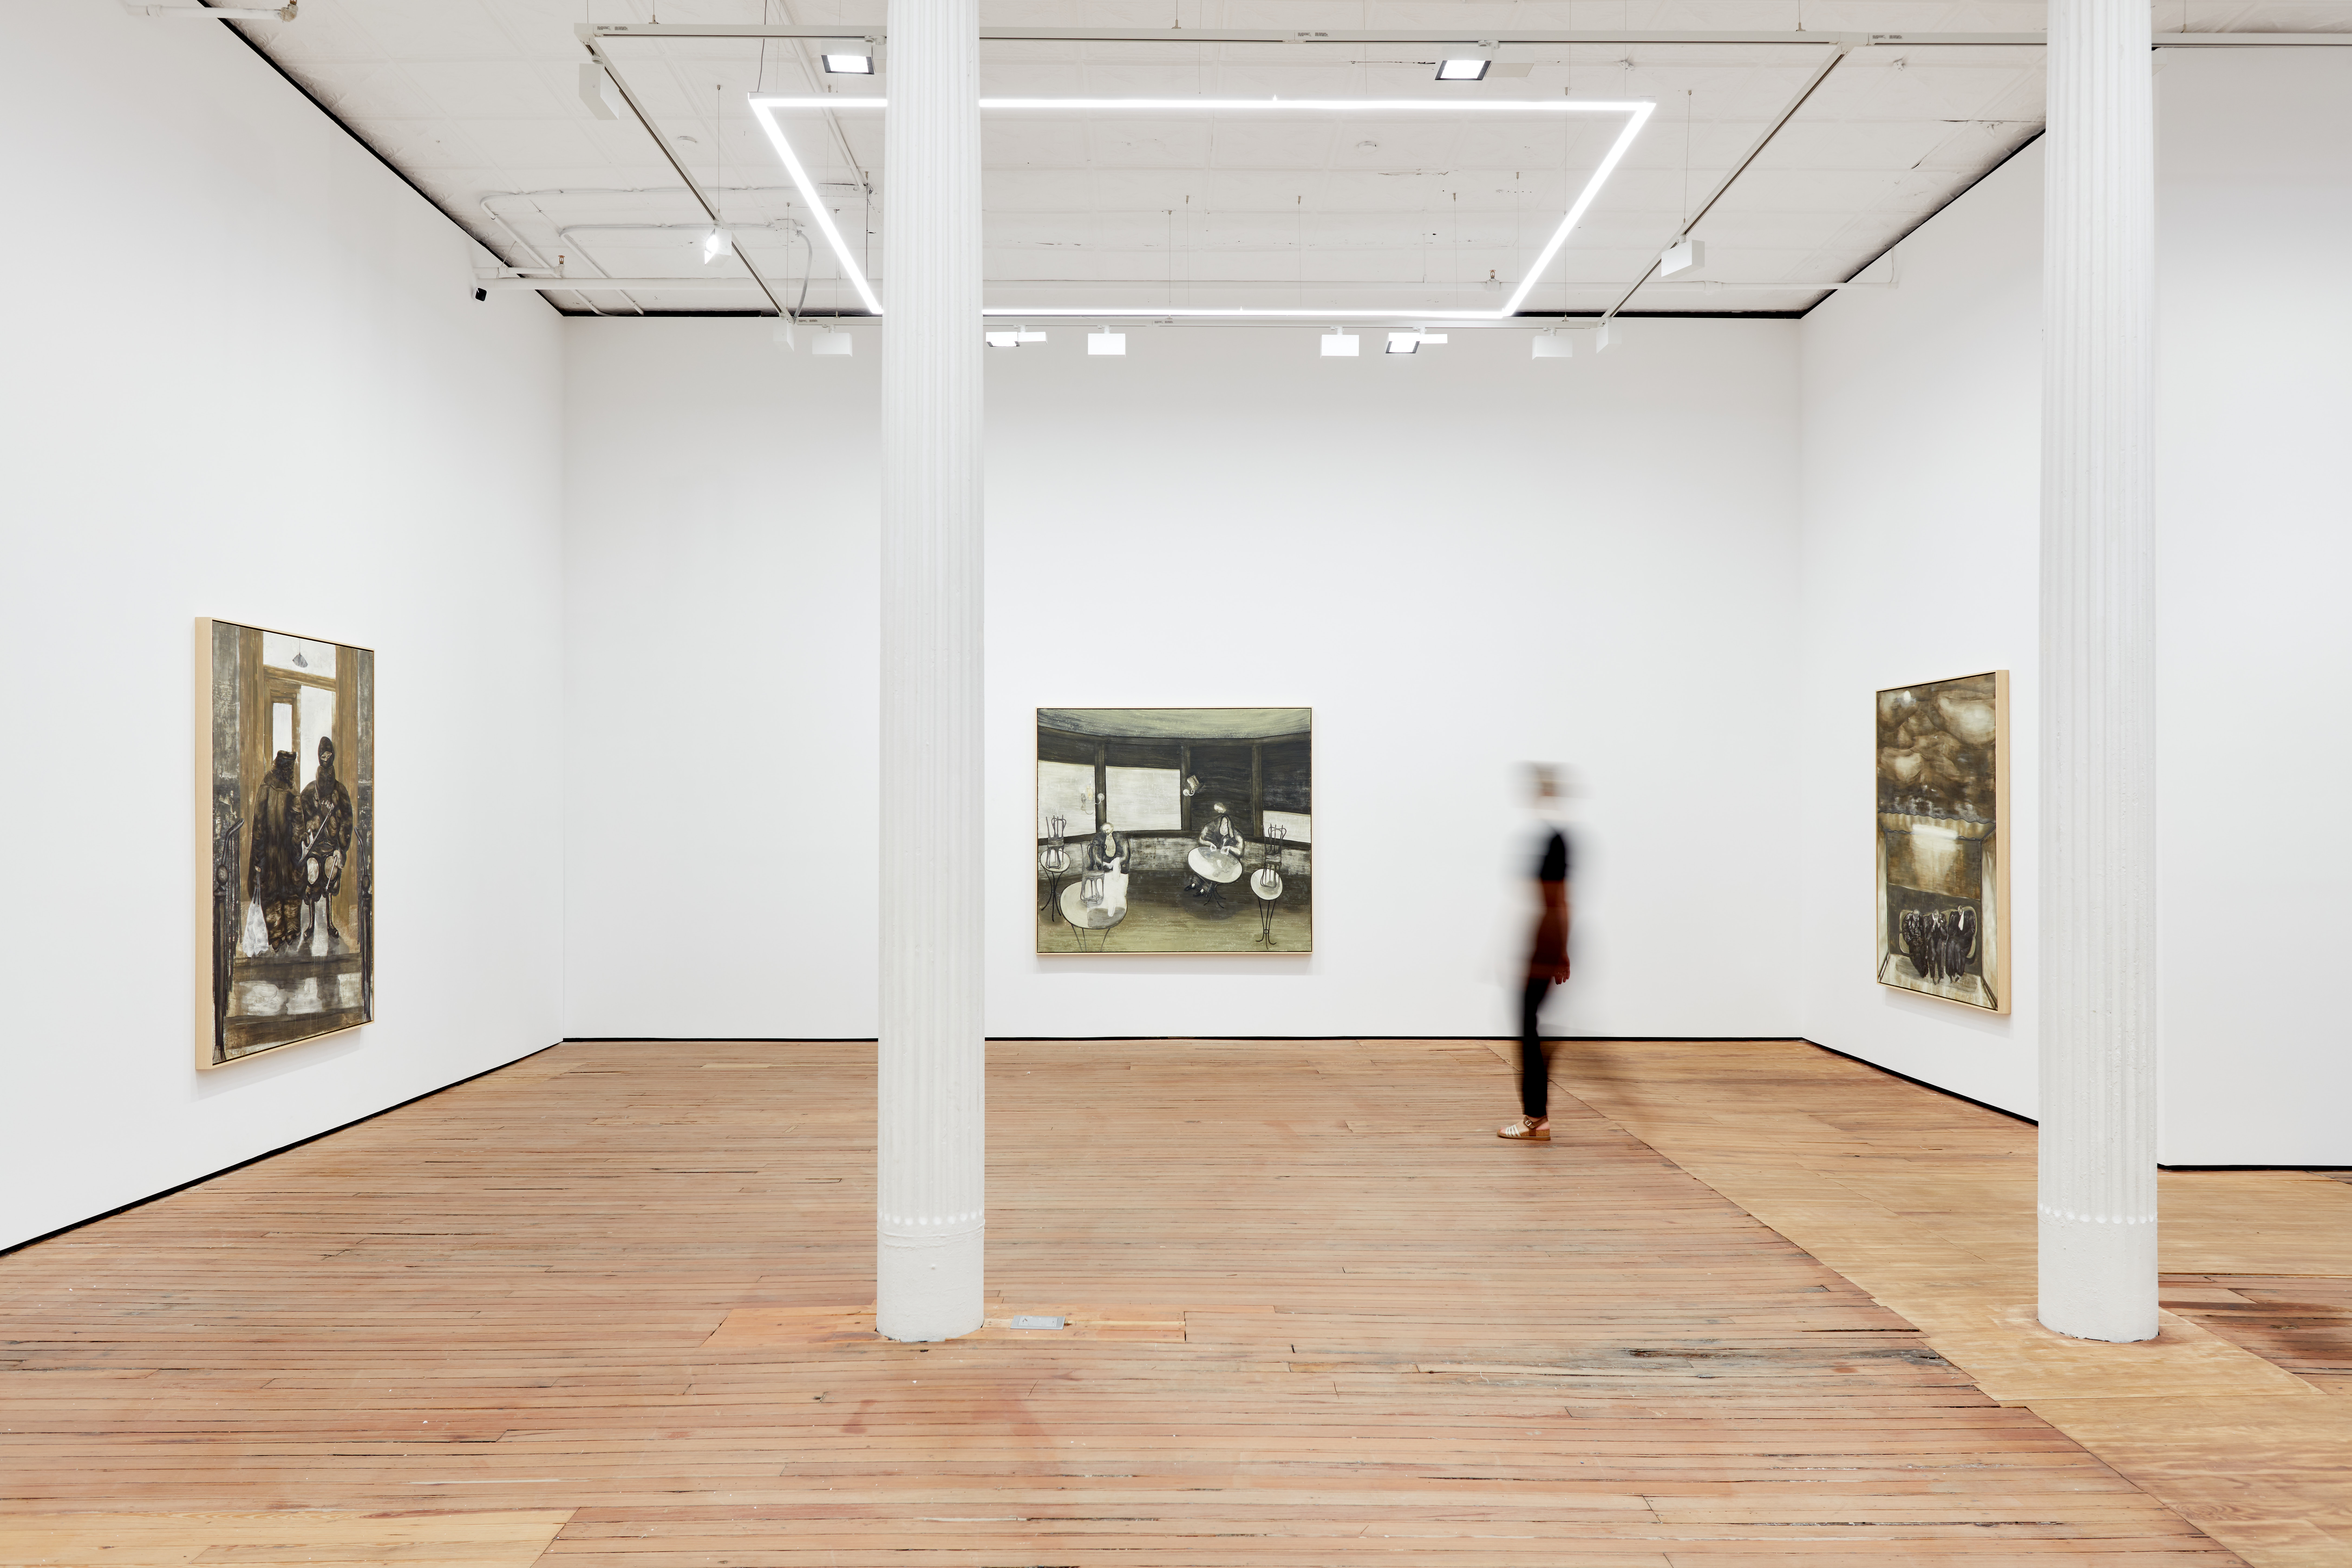 A blurry viewer walking in an art gallery with 3 large paintings exhibited on white walls.